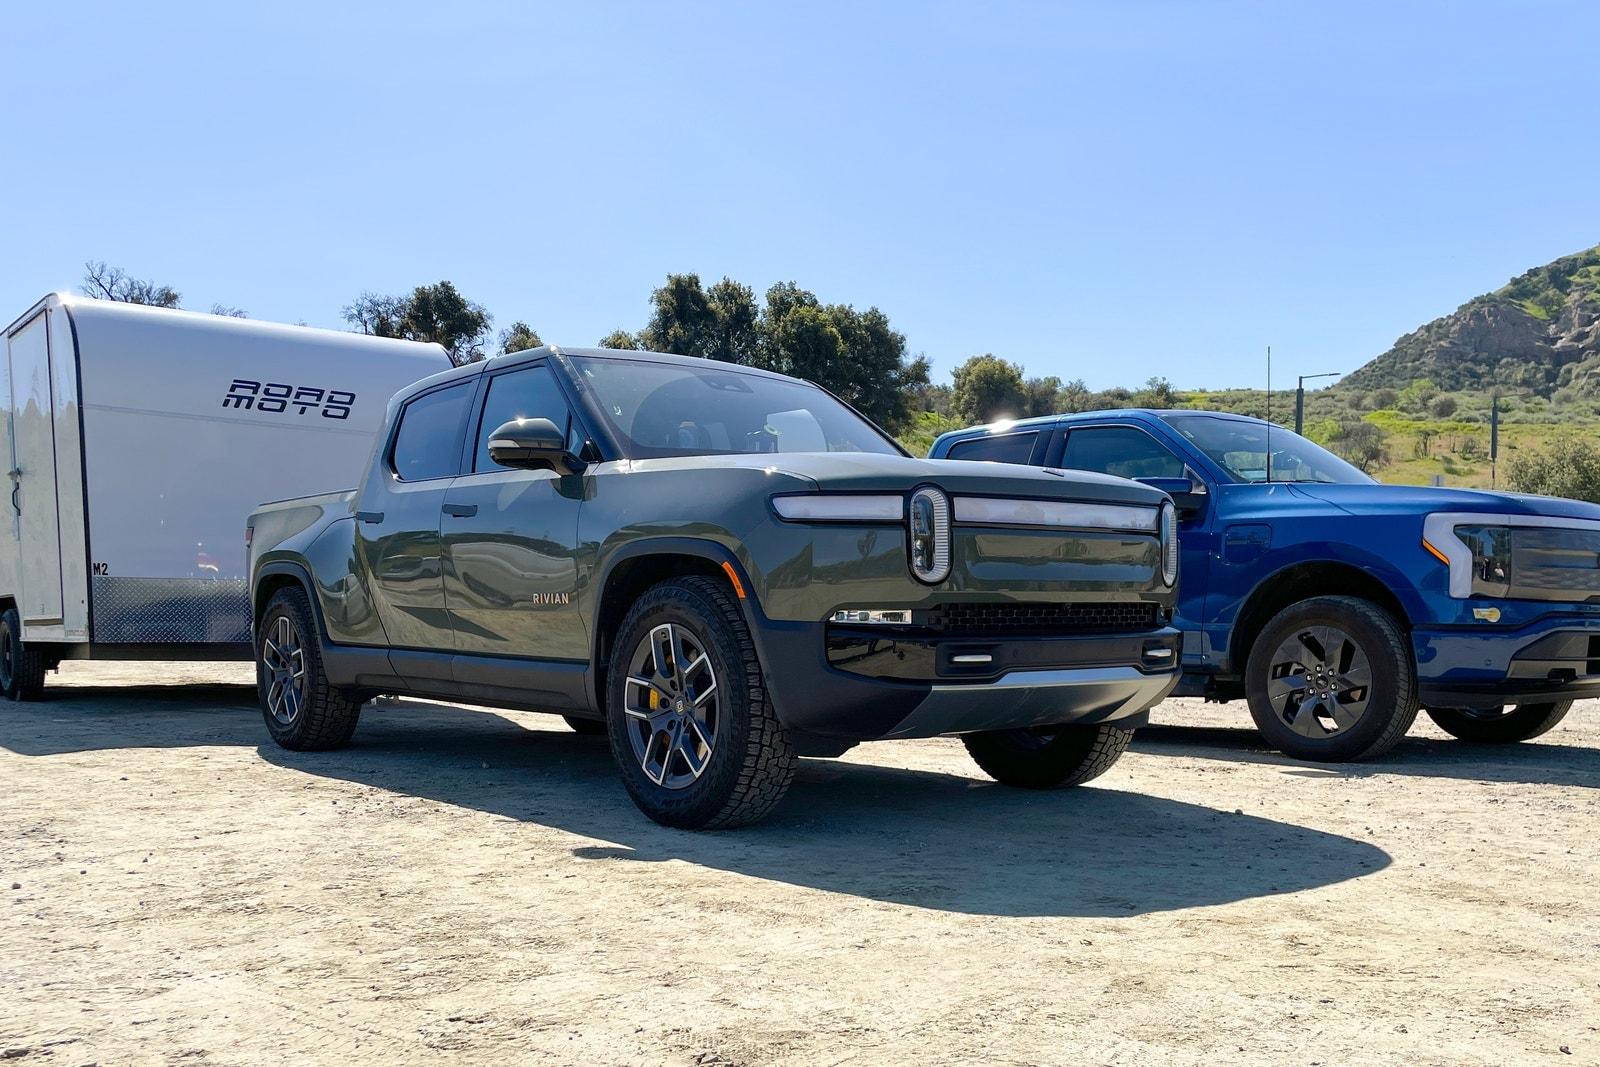 Ford F-150 Lightning Electric Towing Test: F-150 Lightning vs. Rivian R1T rivianxlightning_tow_test_hero_1600